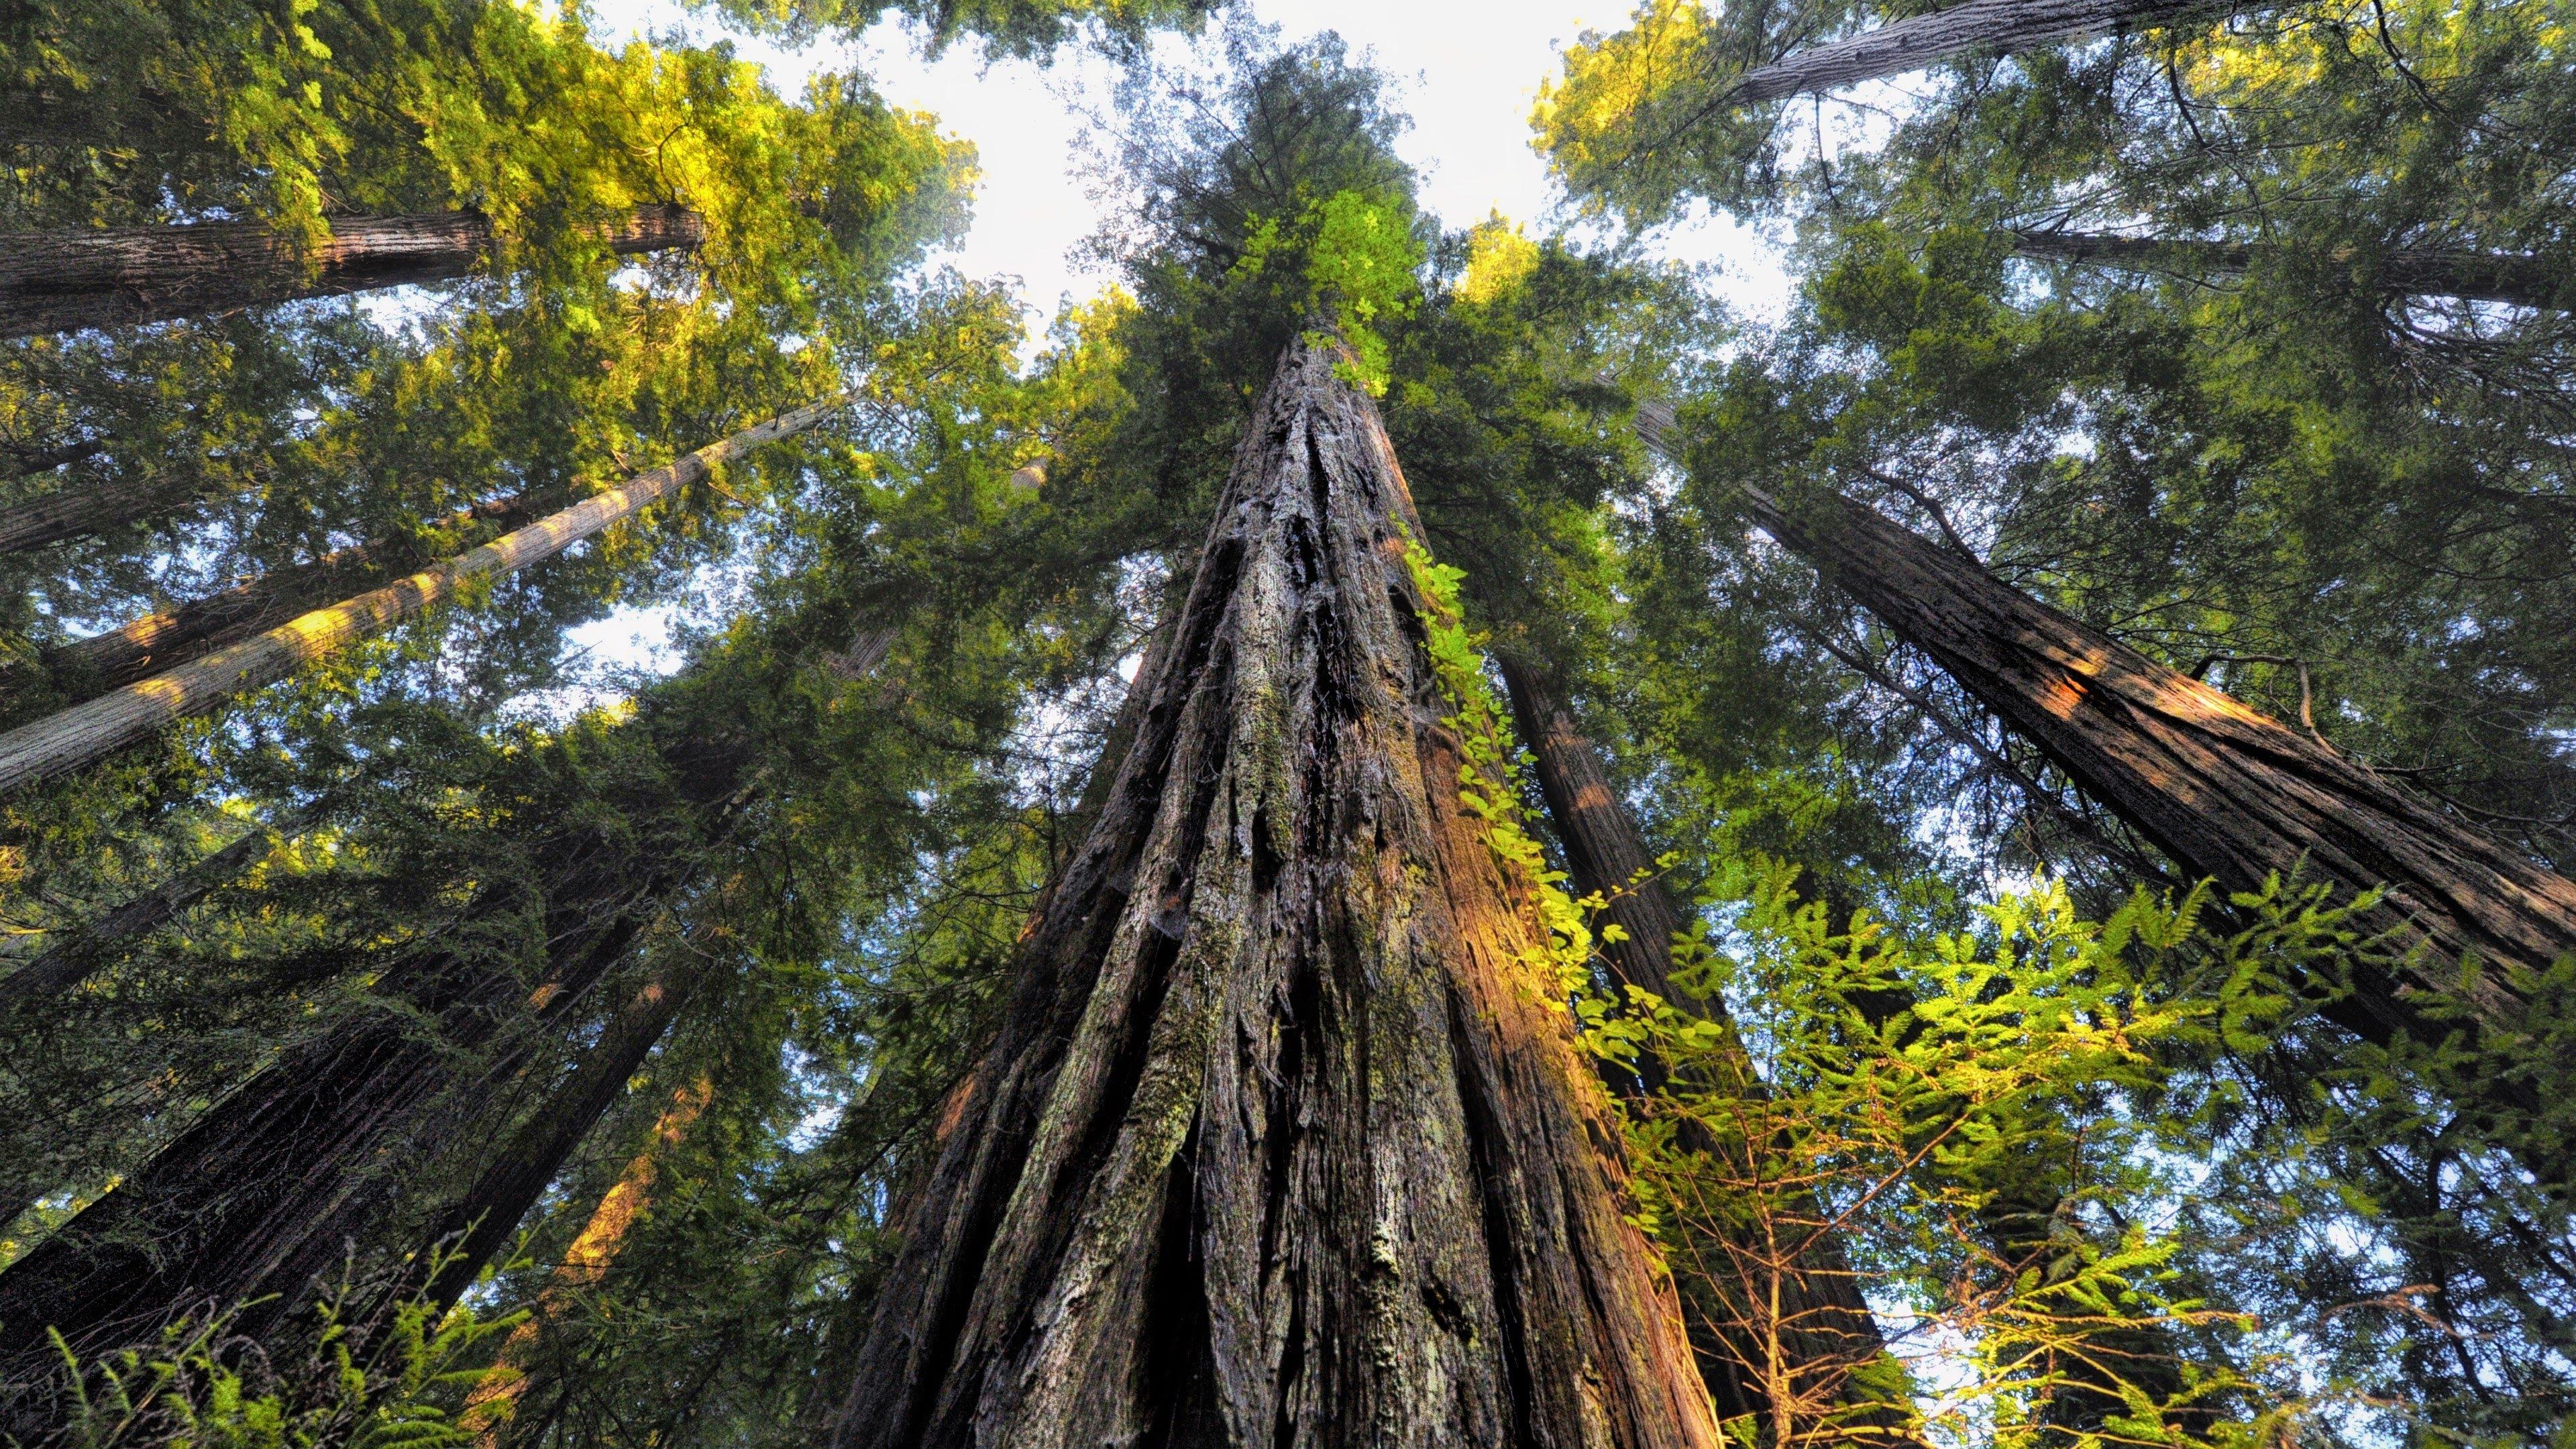 Download 3840x2160 Forest, Old Trees, Worm View, Sequoia National